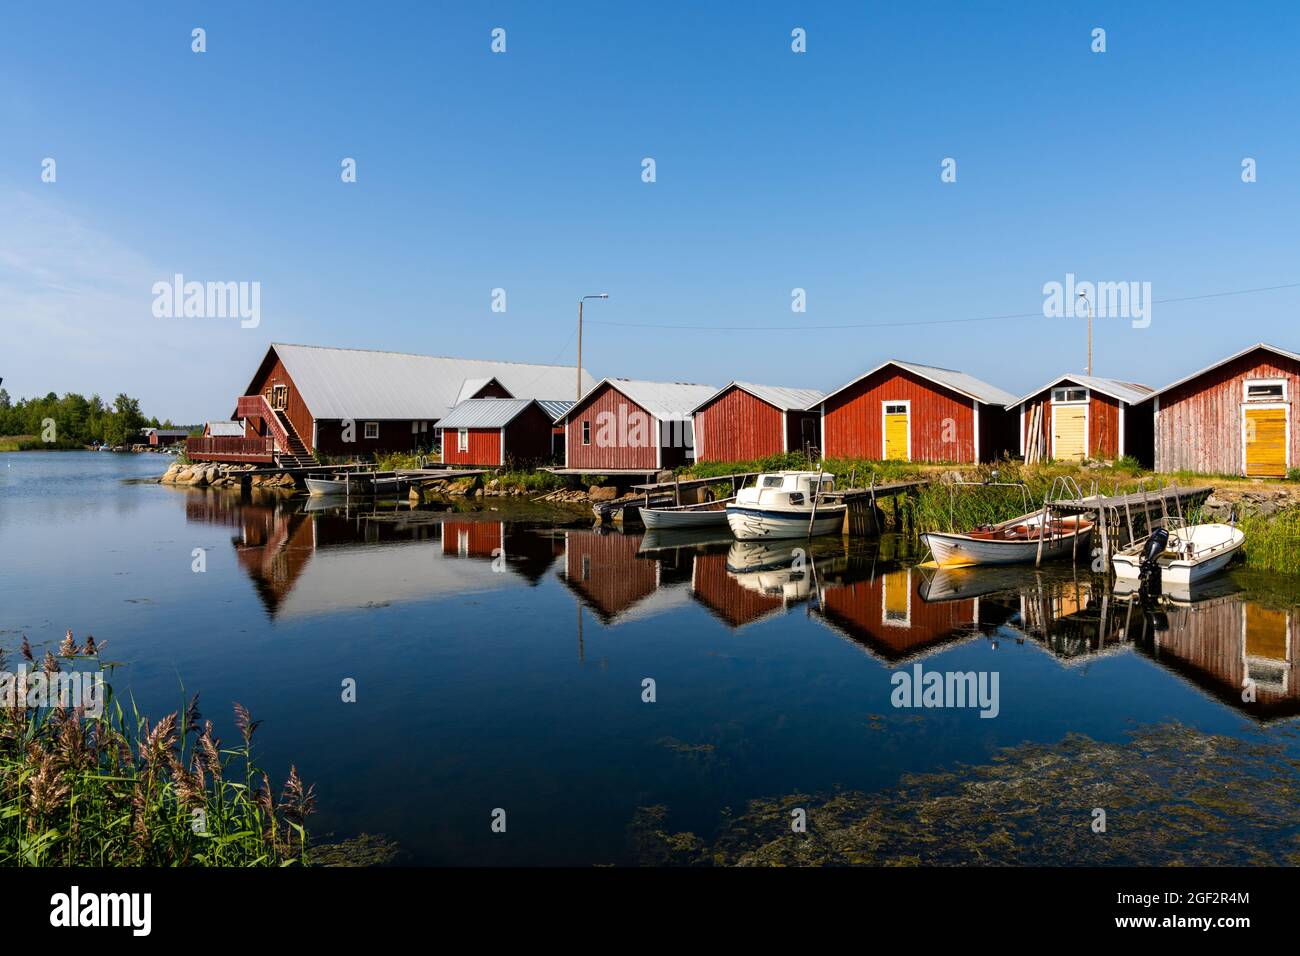 Svedjehamm, Finland - 28 July, 2021: colorful fishing cottages and boats reflected in the water under a blue sky Stock Photo